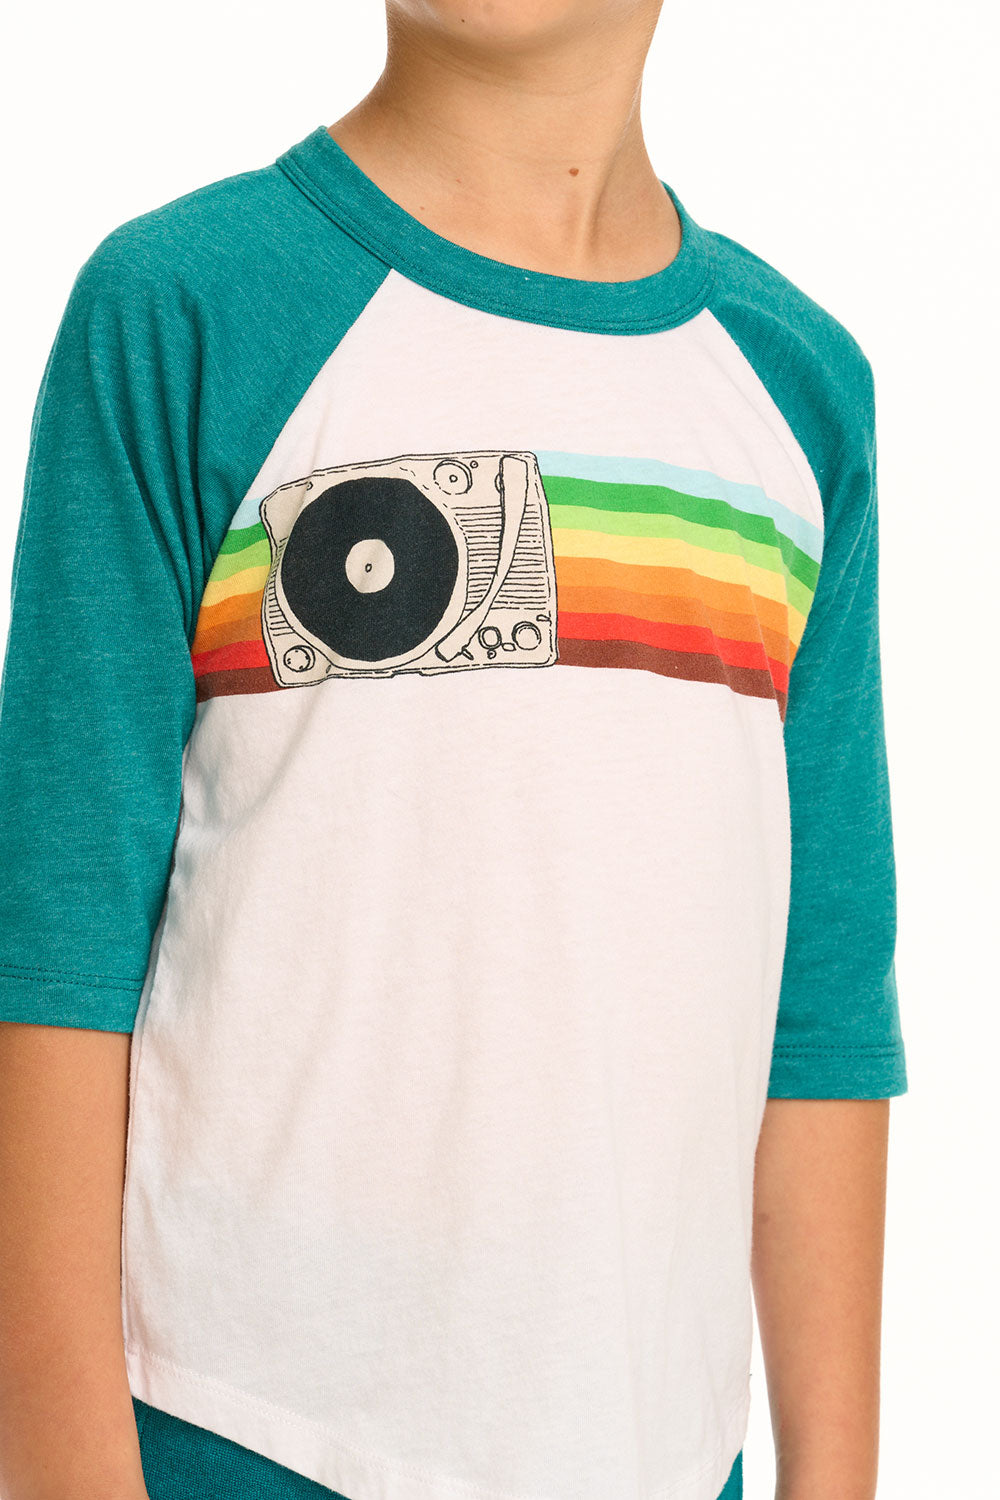 Turntable Rainbow Recycled Vintage Jersey Baseball Tee BOYS chaserbrand